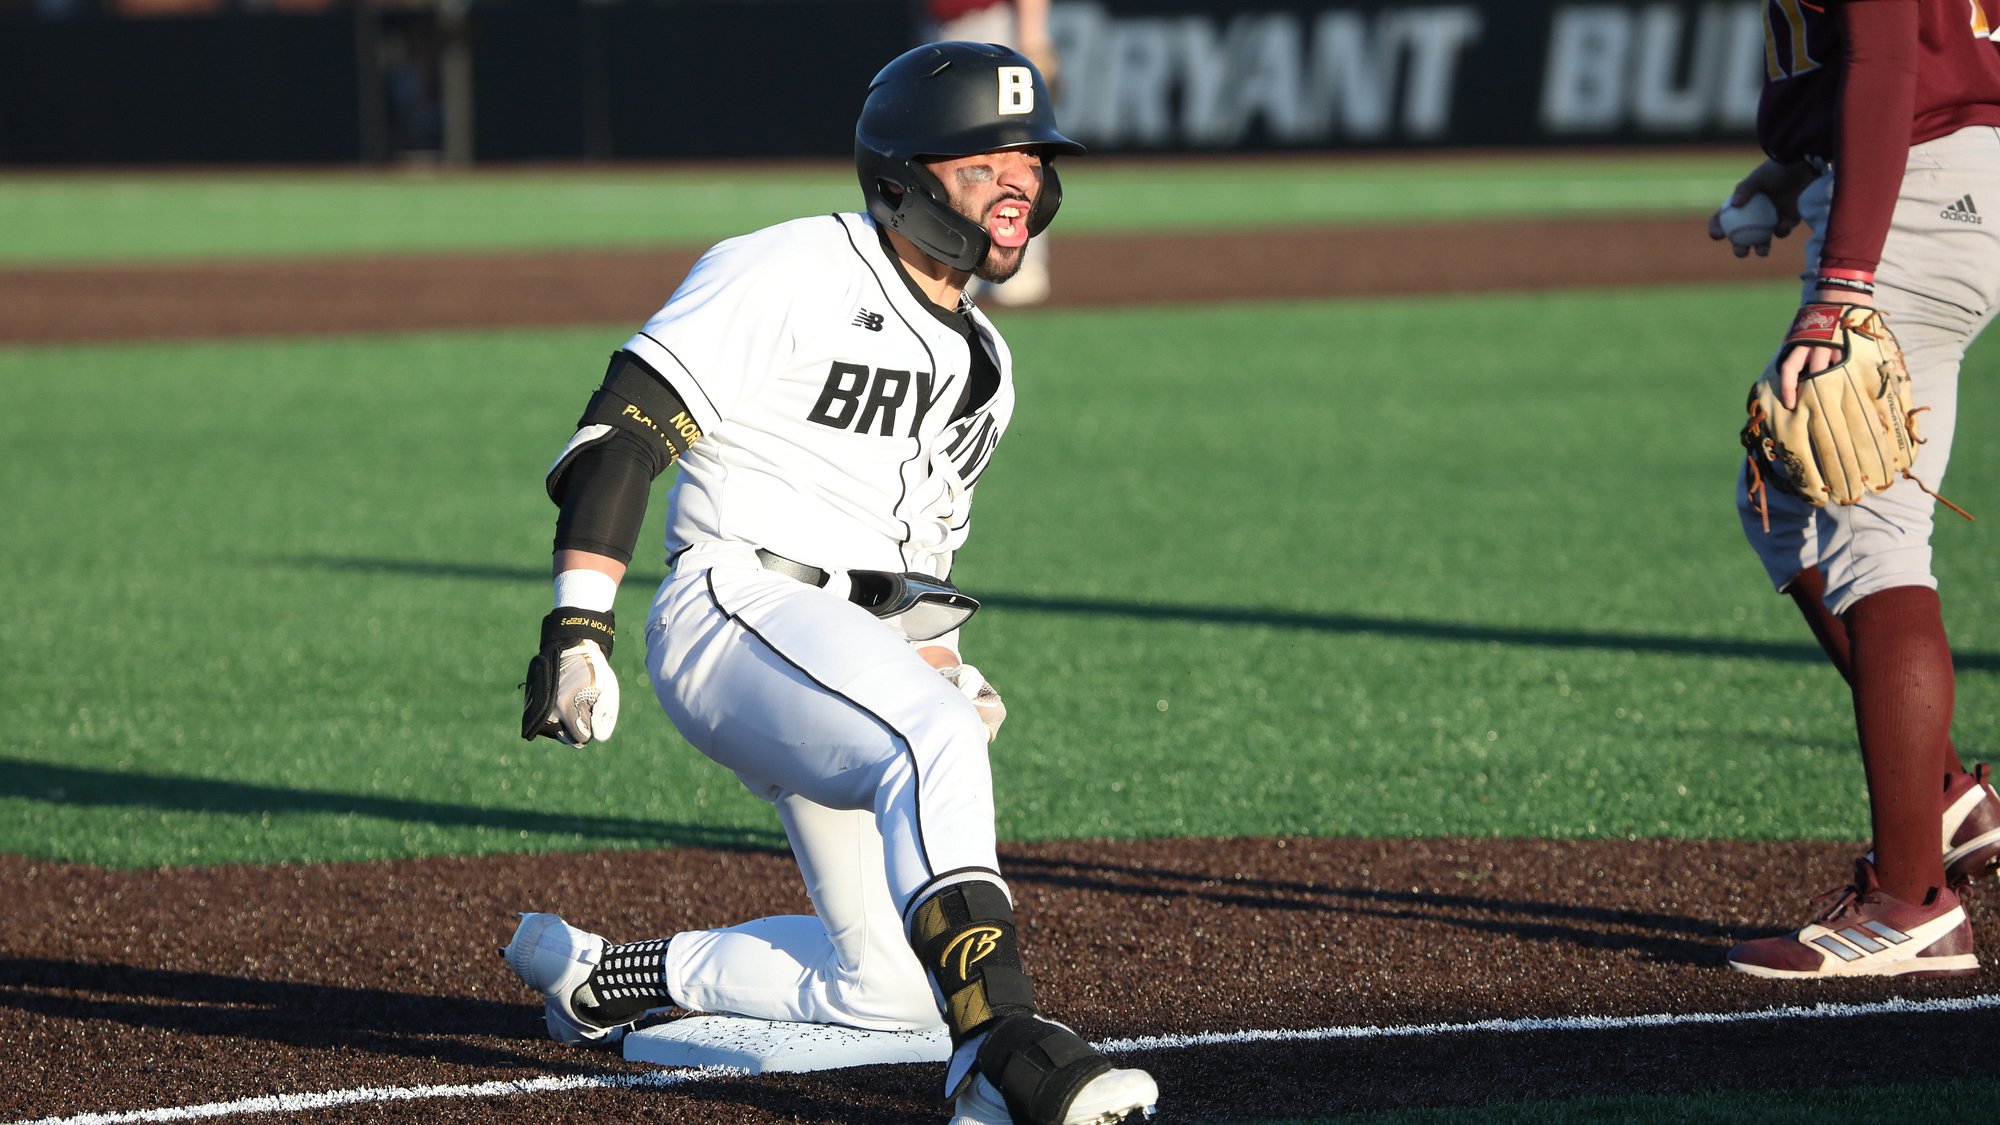 Bryant wins on walk-off wild pitch against Iona